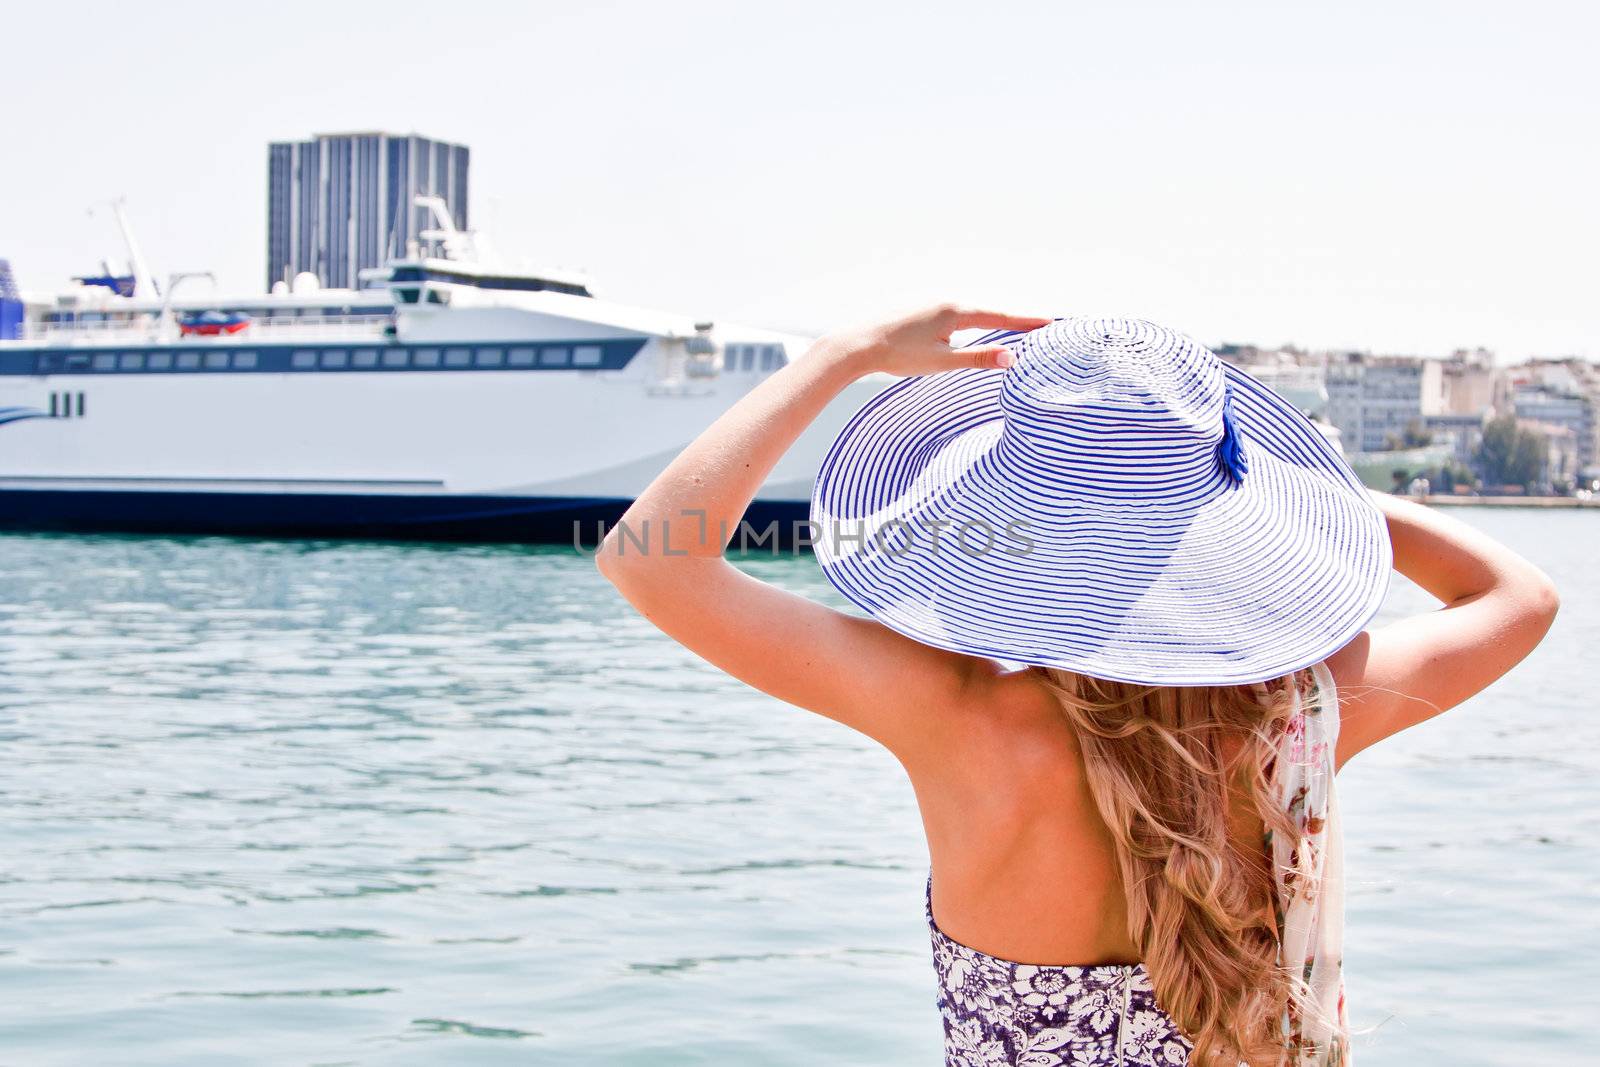 Portrait of a young and beautiful girl in the background of a large ocean liner